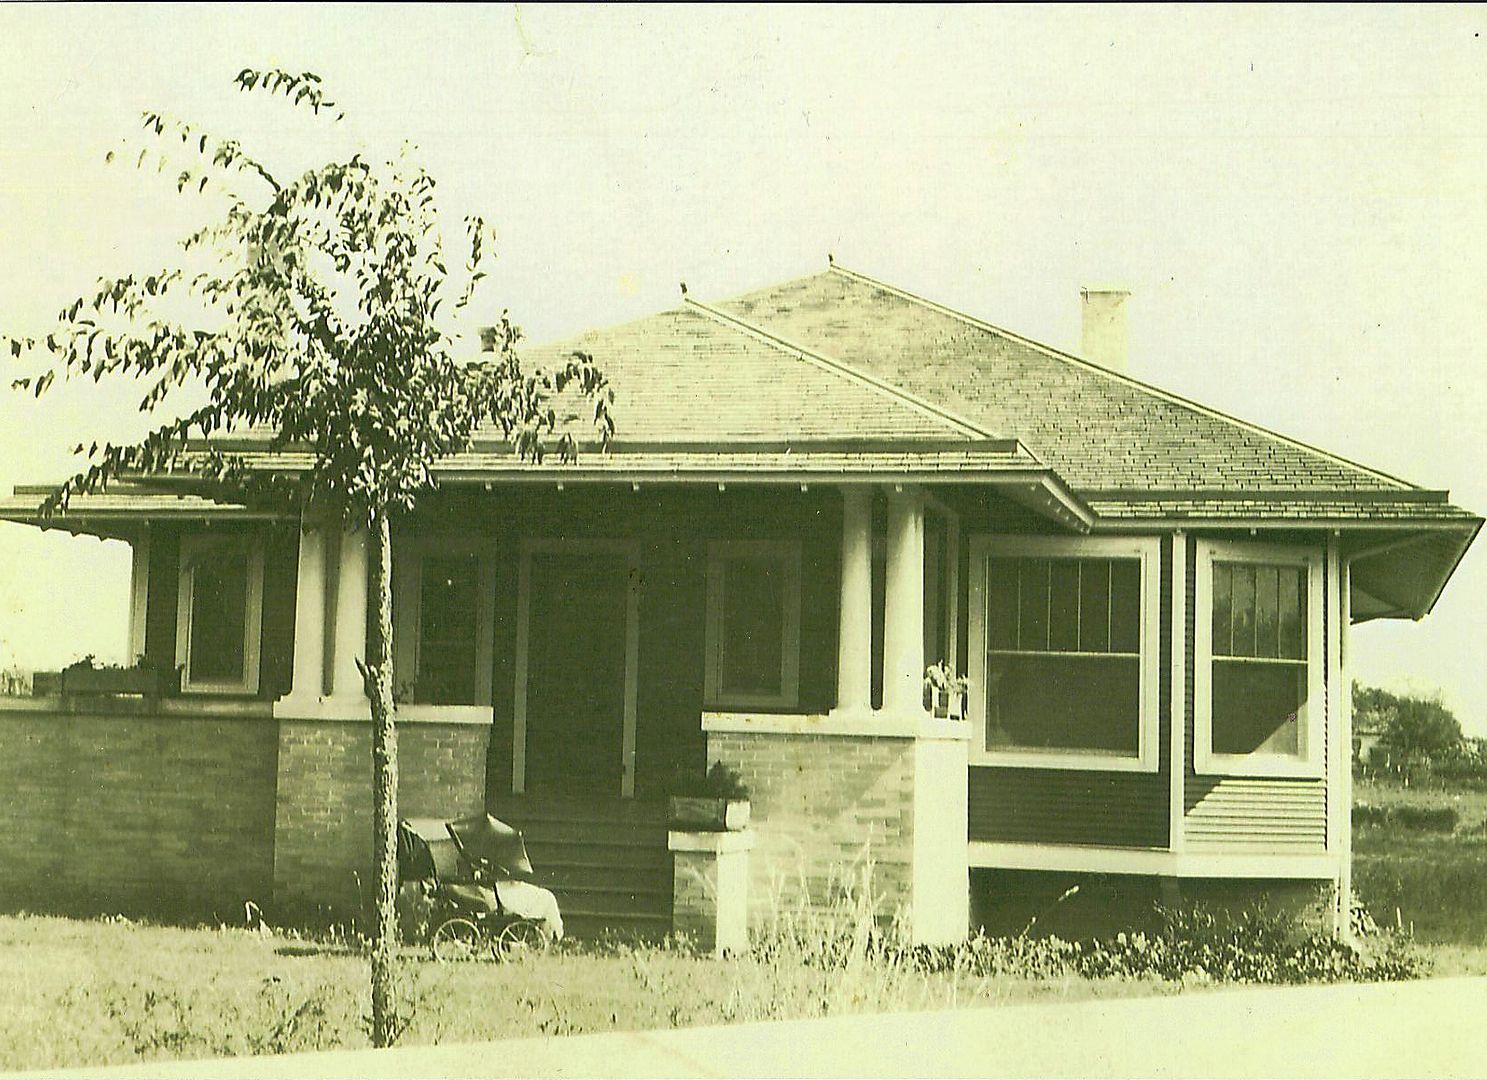 Another shot of Mr. Logans Avondale, shortly after it was built.